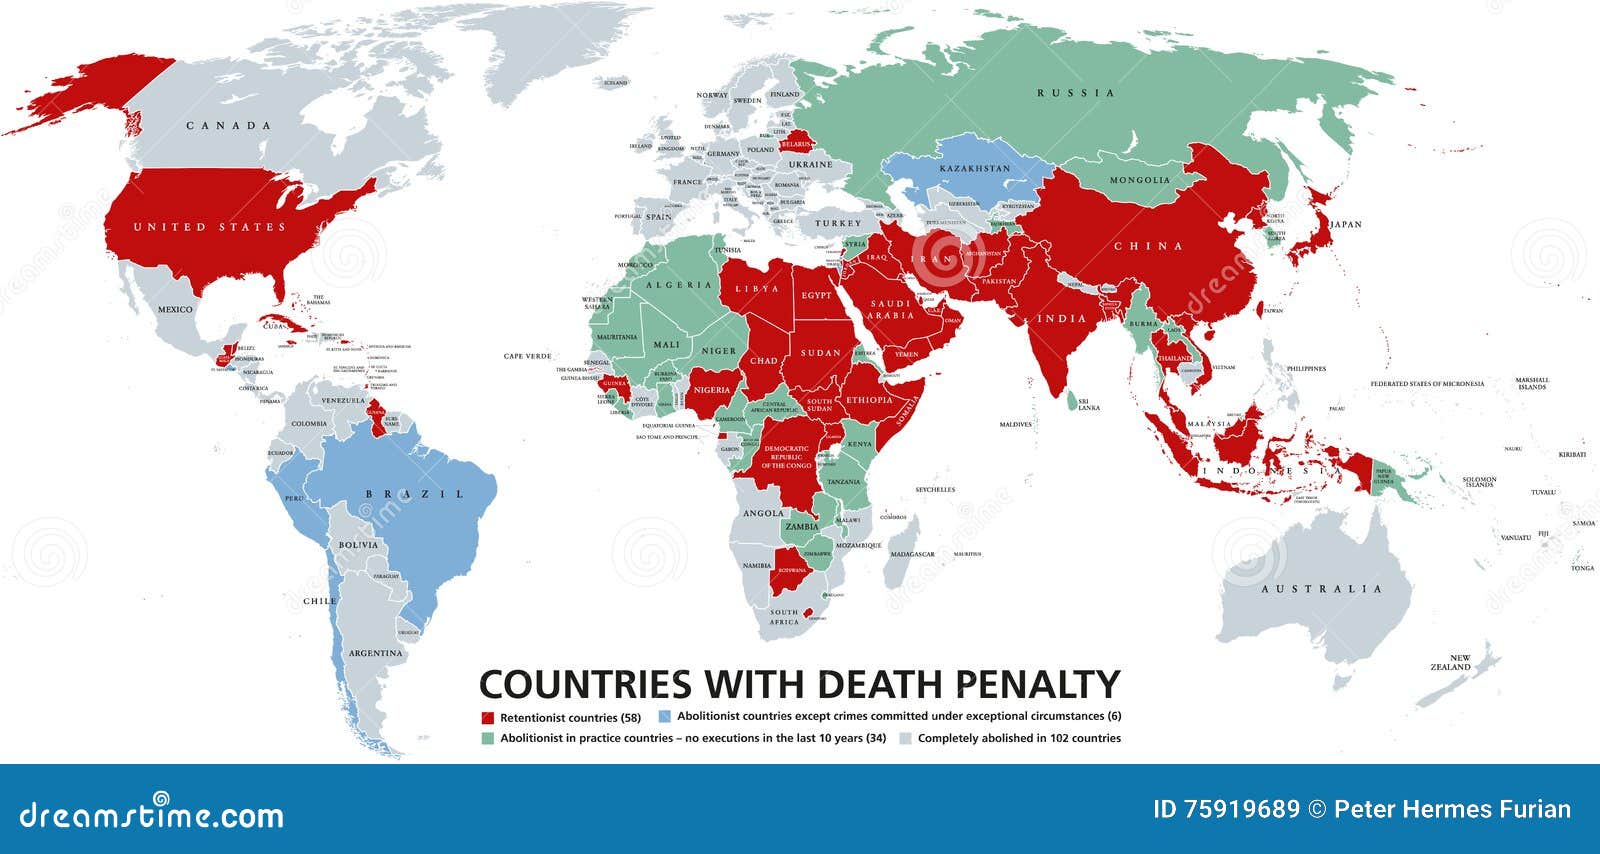 death-penalty-countries-world-map-retentionist-states-capital-punishment-red-color-abolitionist-nations-75919689.jpg